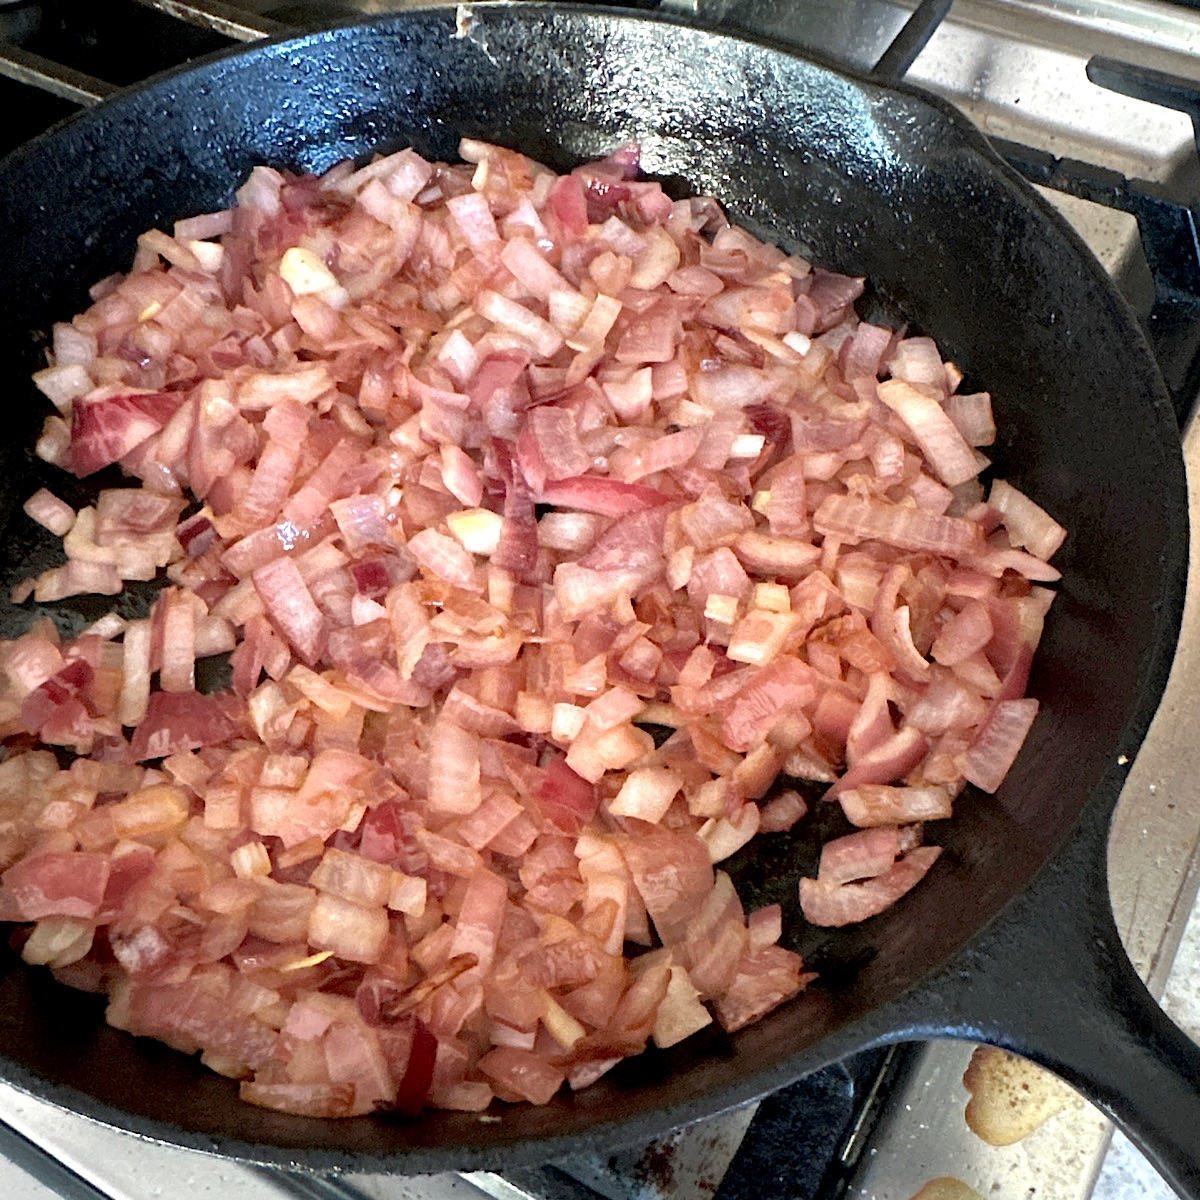 Onions cooking in a black cast iron skillet.